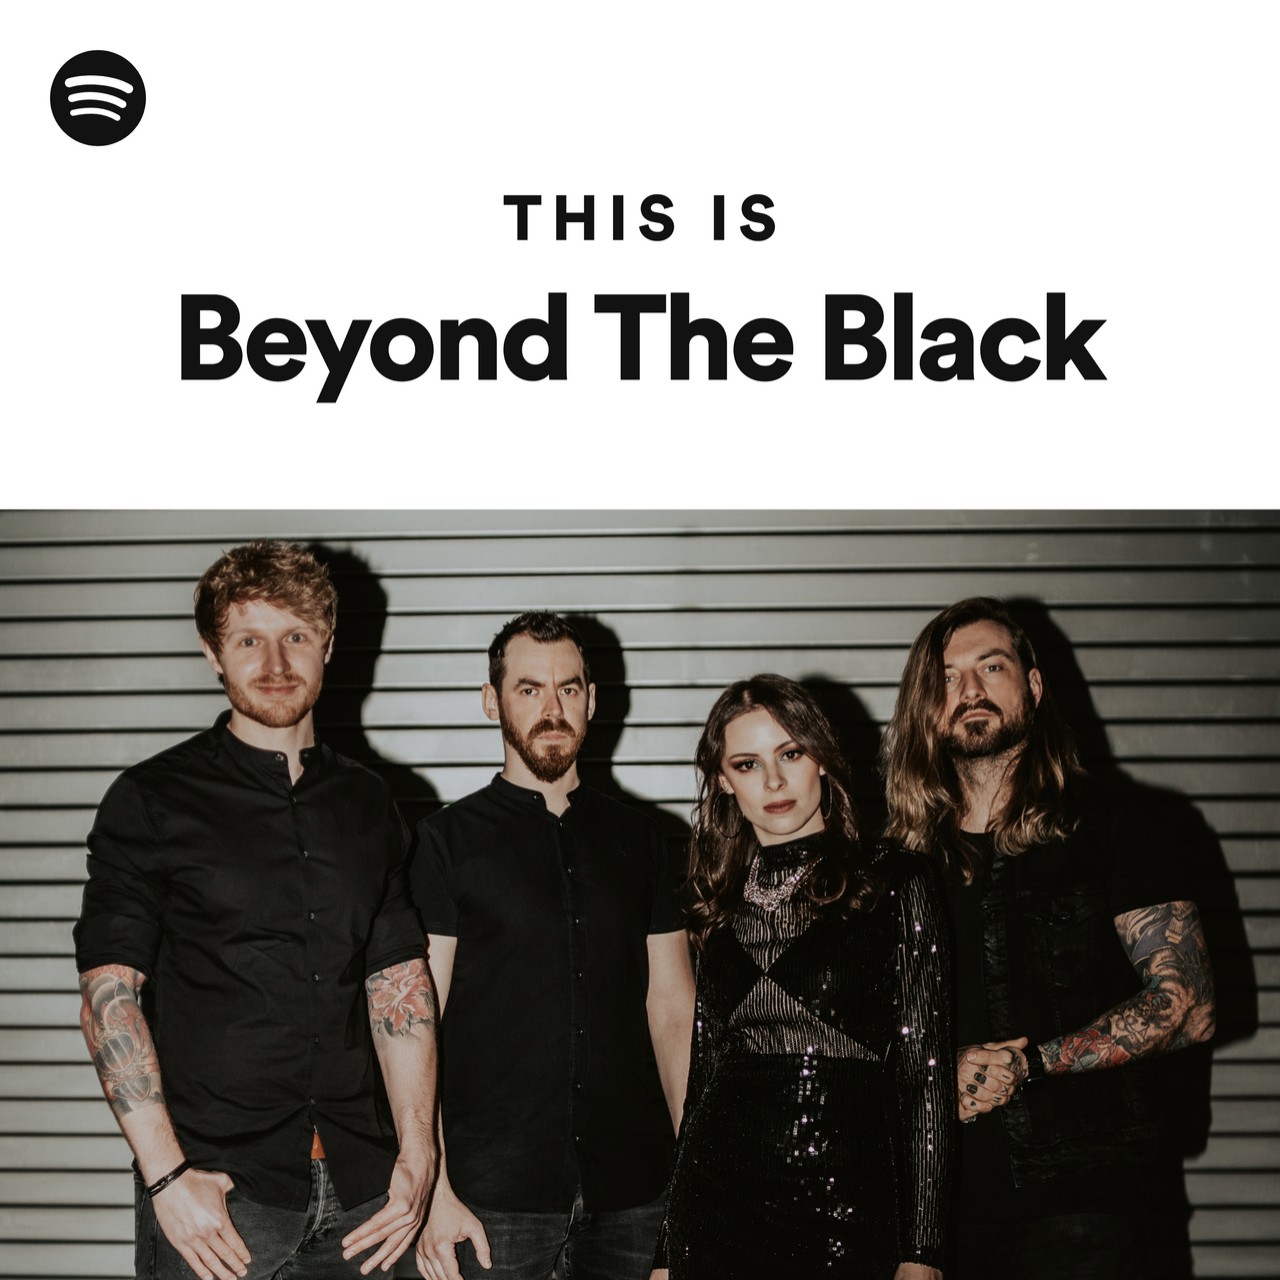 This Is Beyond The Black